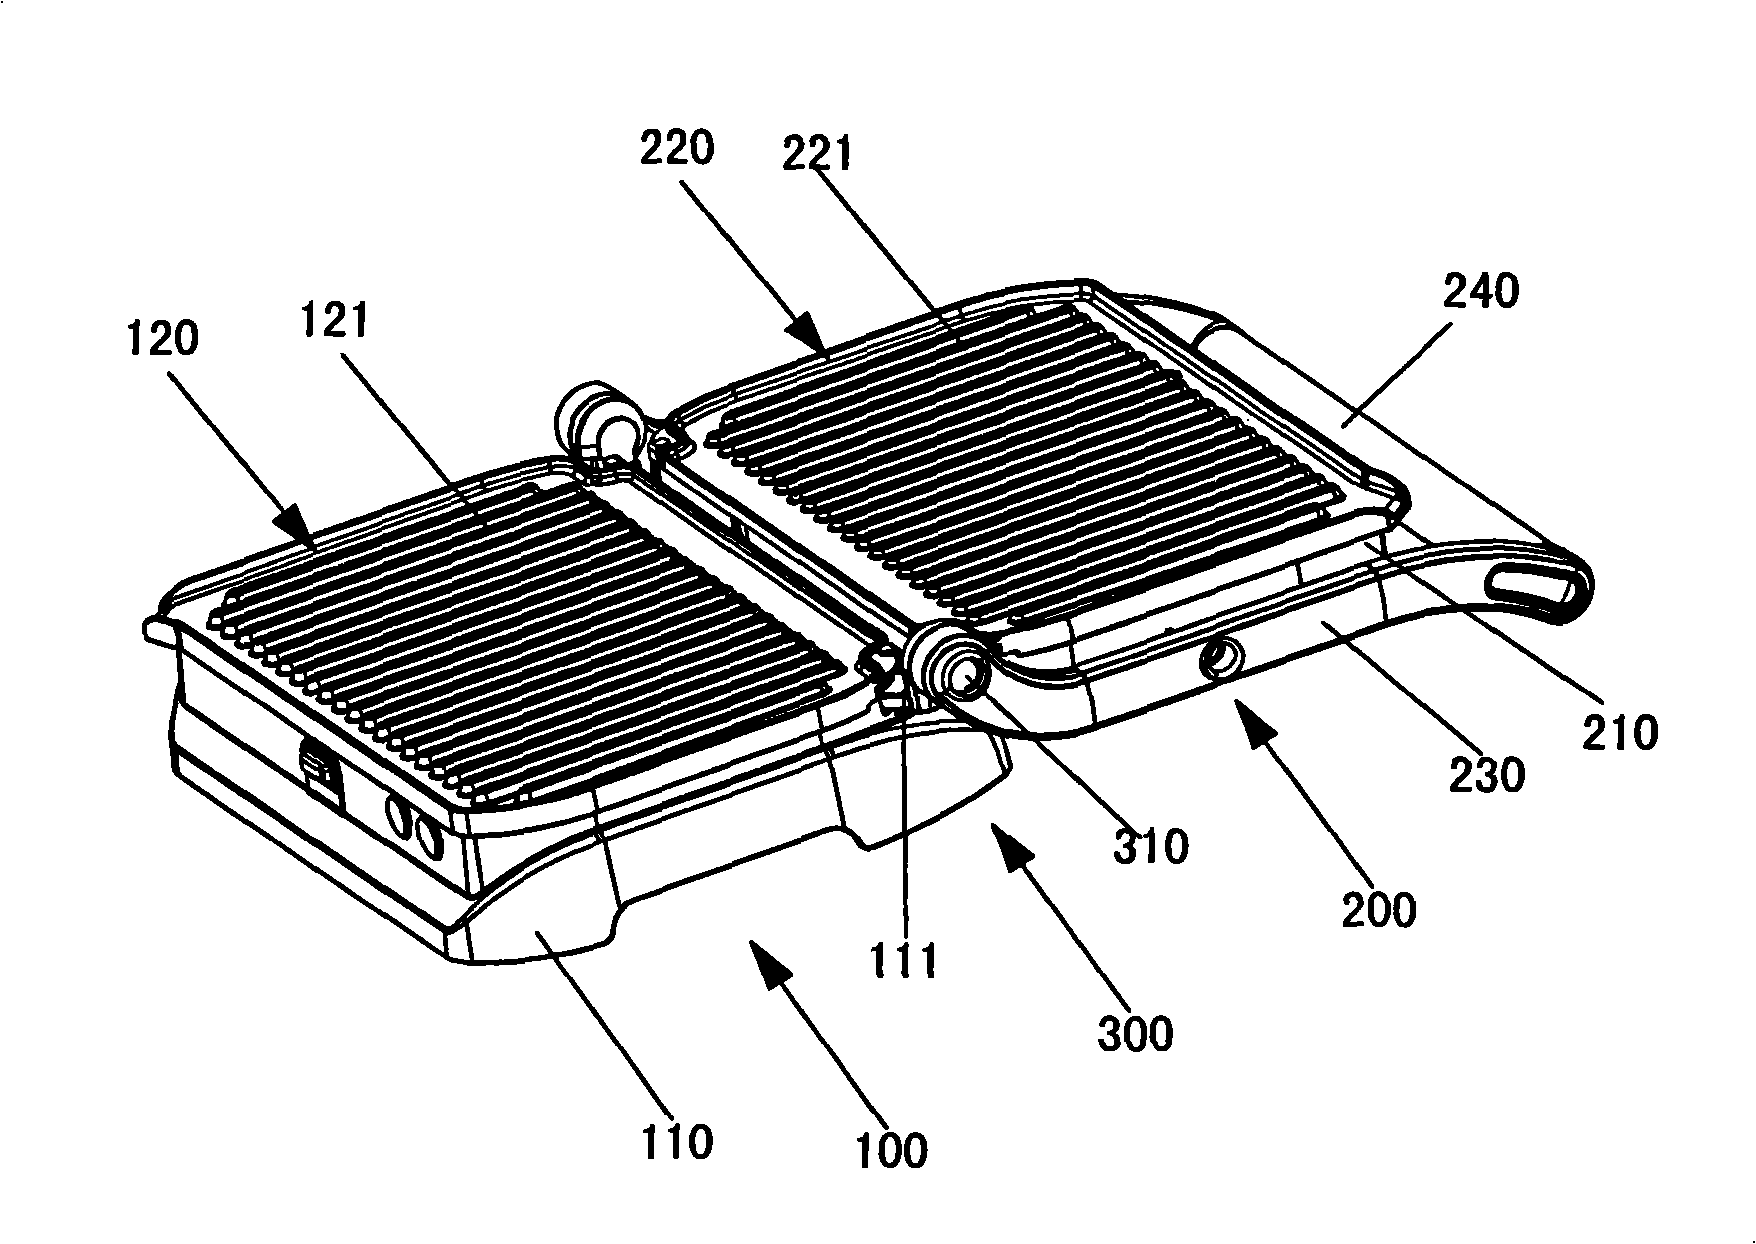 Frying and roasting device